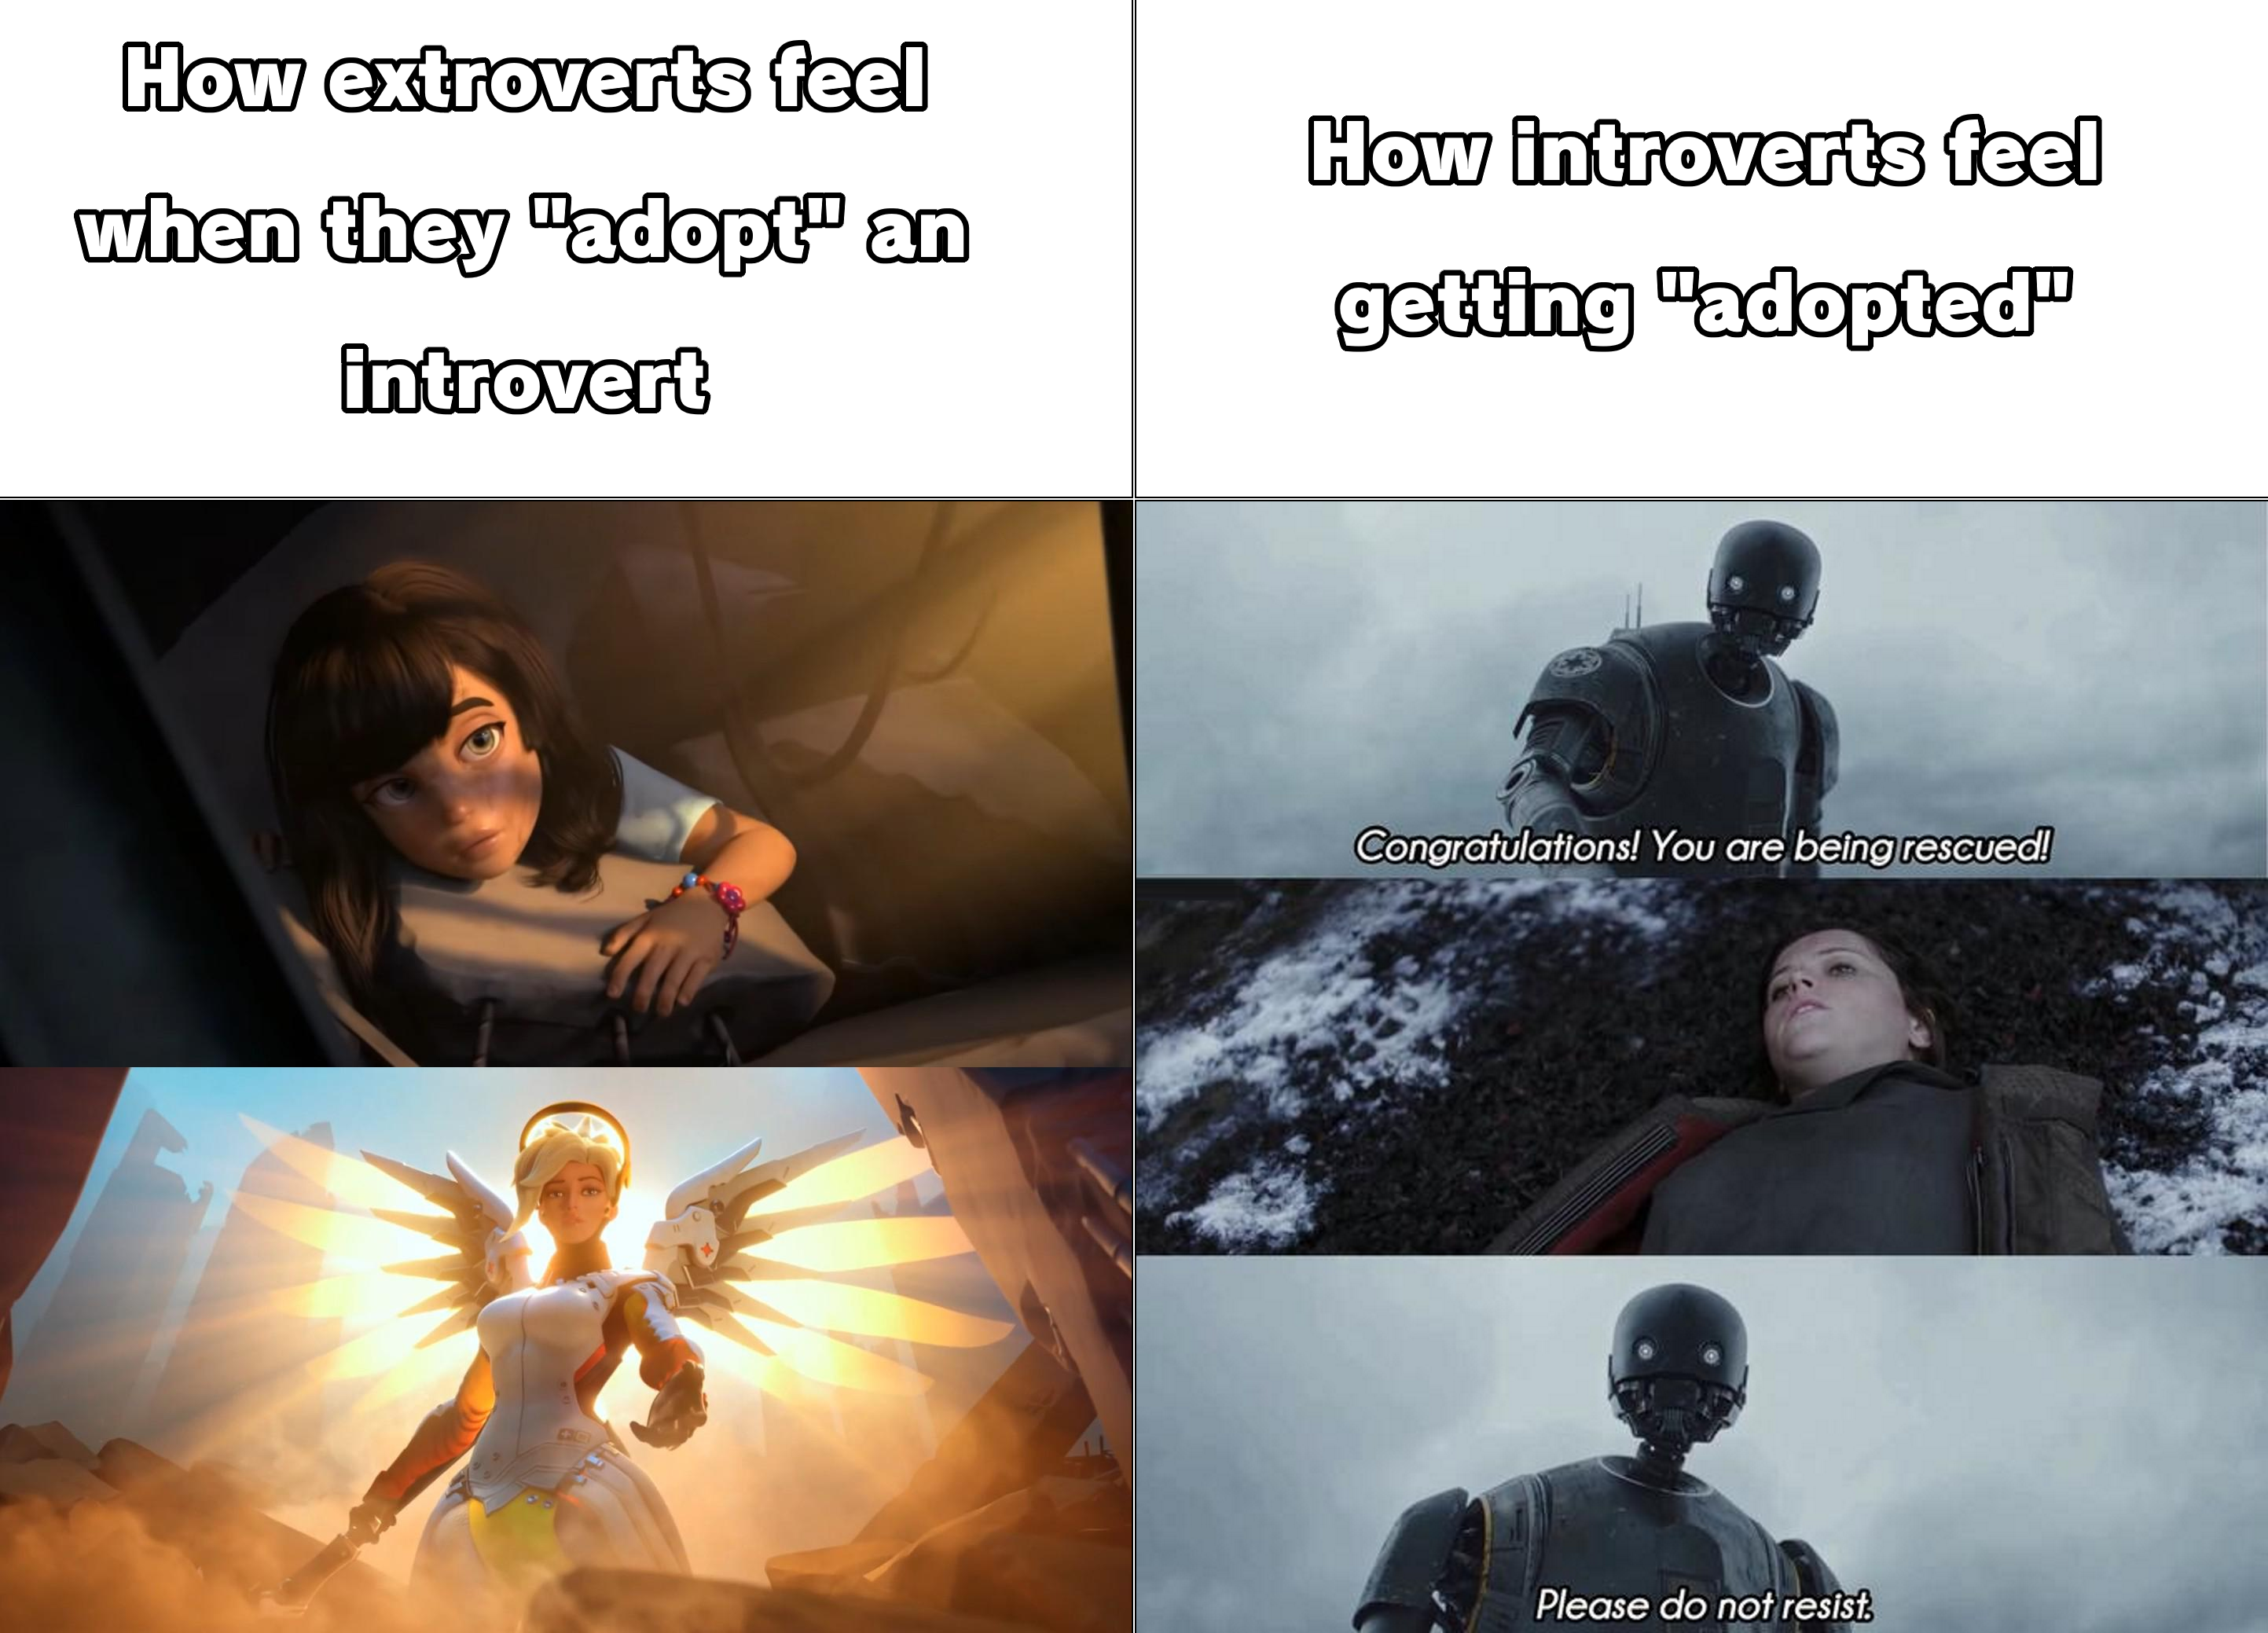 overwatch mercy meme template - How extroverts feel How introverts feel when they "adopt" an getting "adopted" introvert Congratulations! You are being rescued! Please do not resist